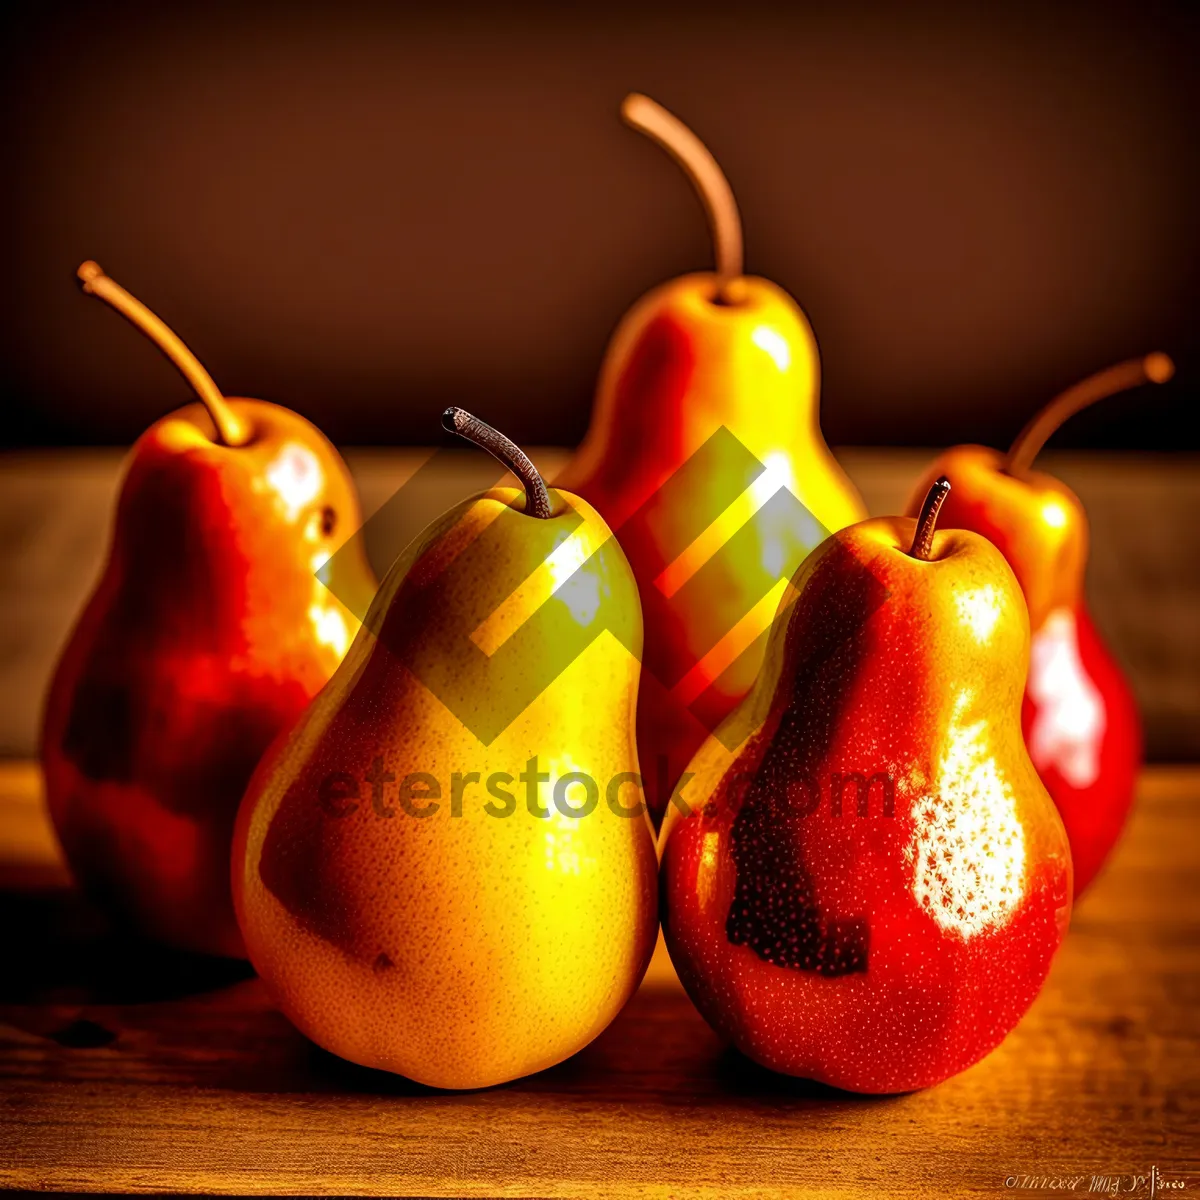 Picture of Fresh and Juicy Yellow Pears - Delicious and Nutritious!